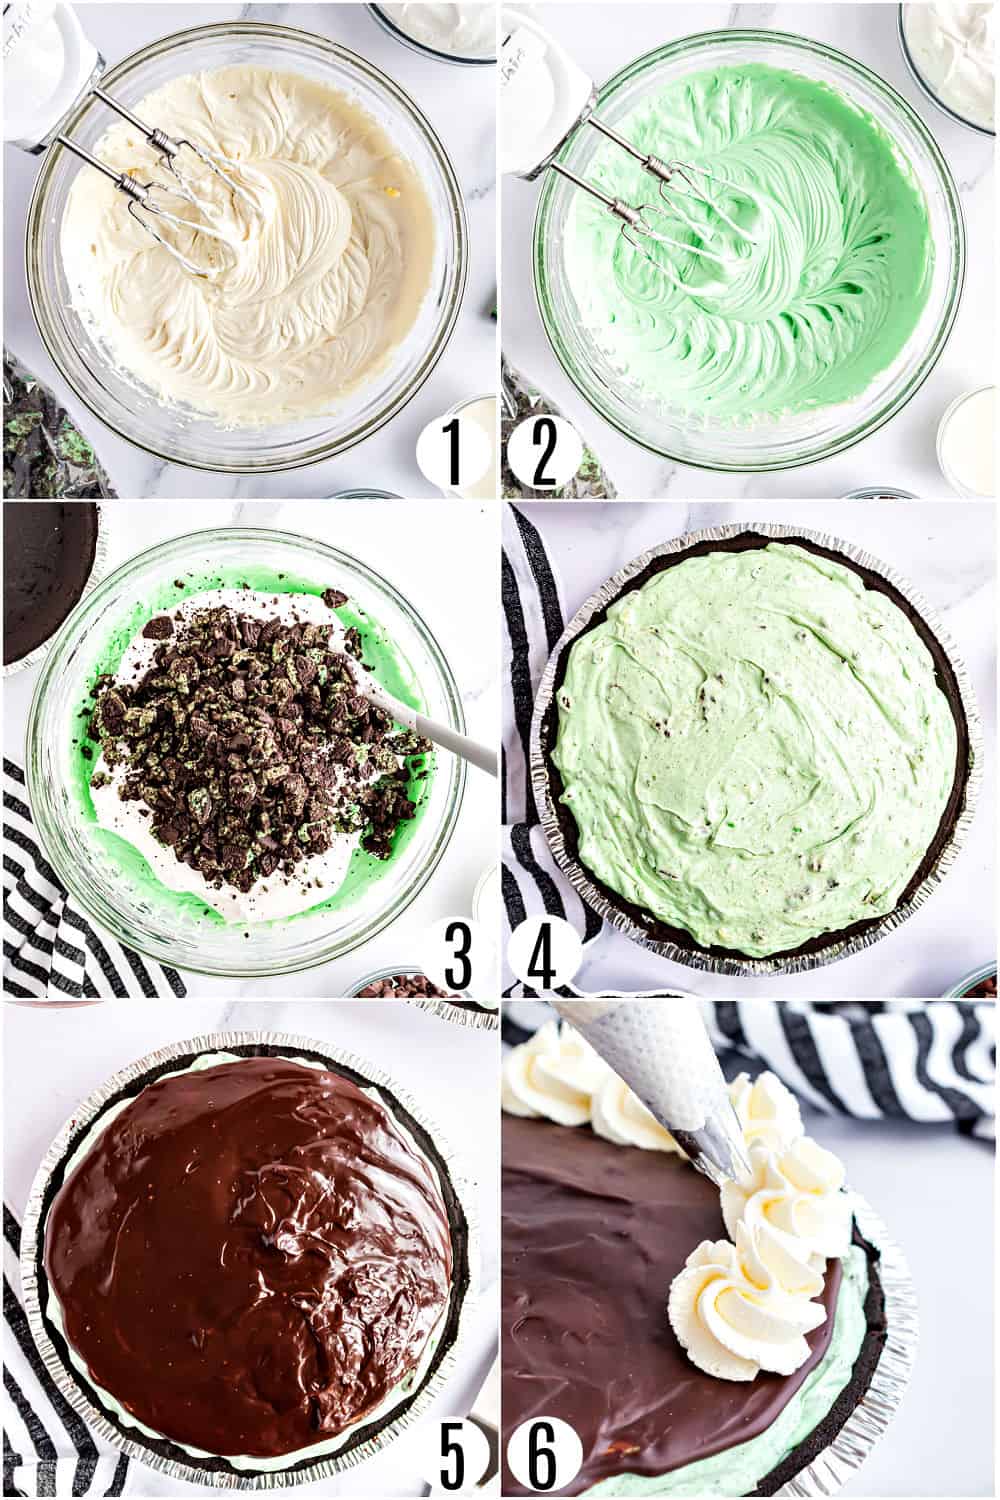 Step by step photos showing how to make a grasshopper pie.